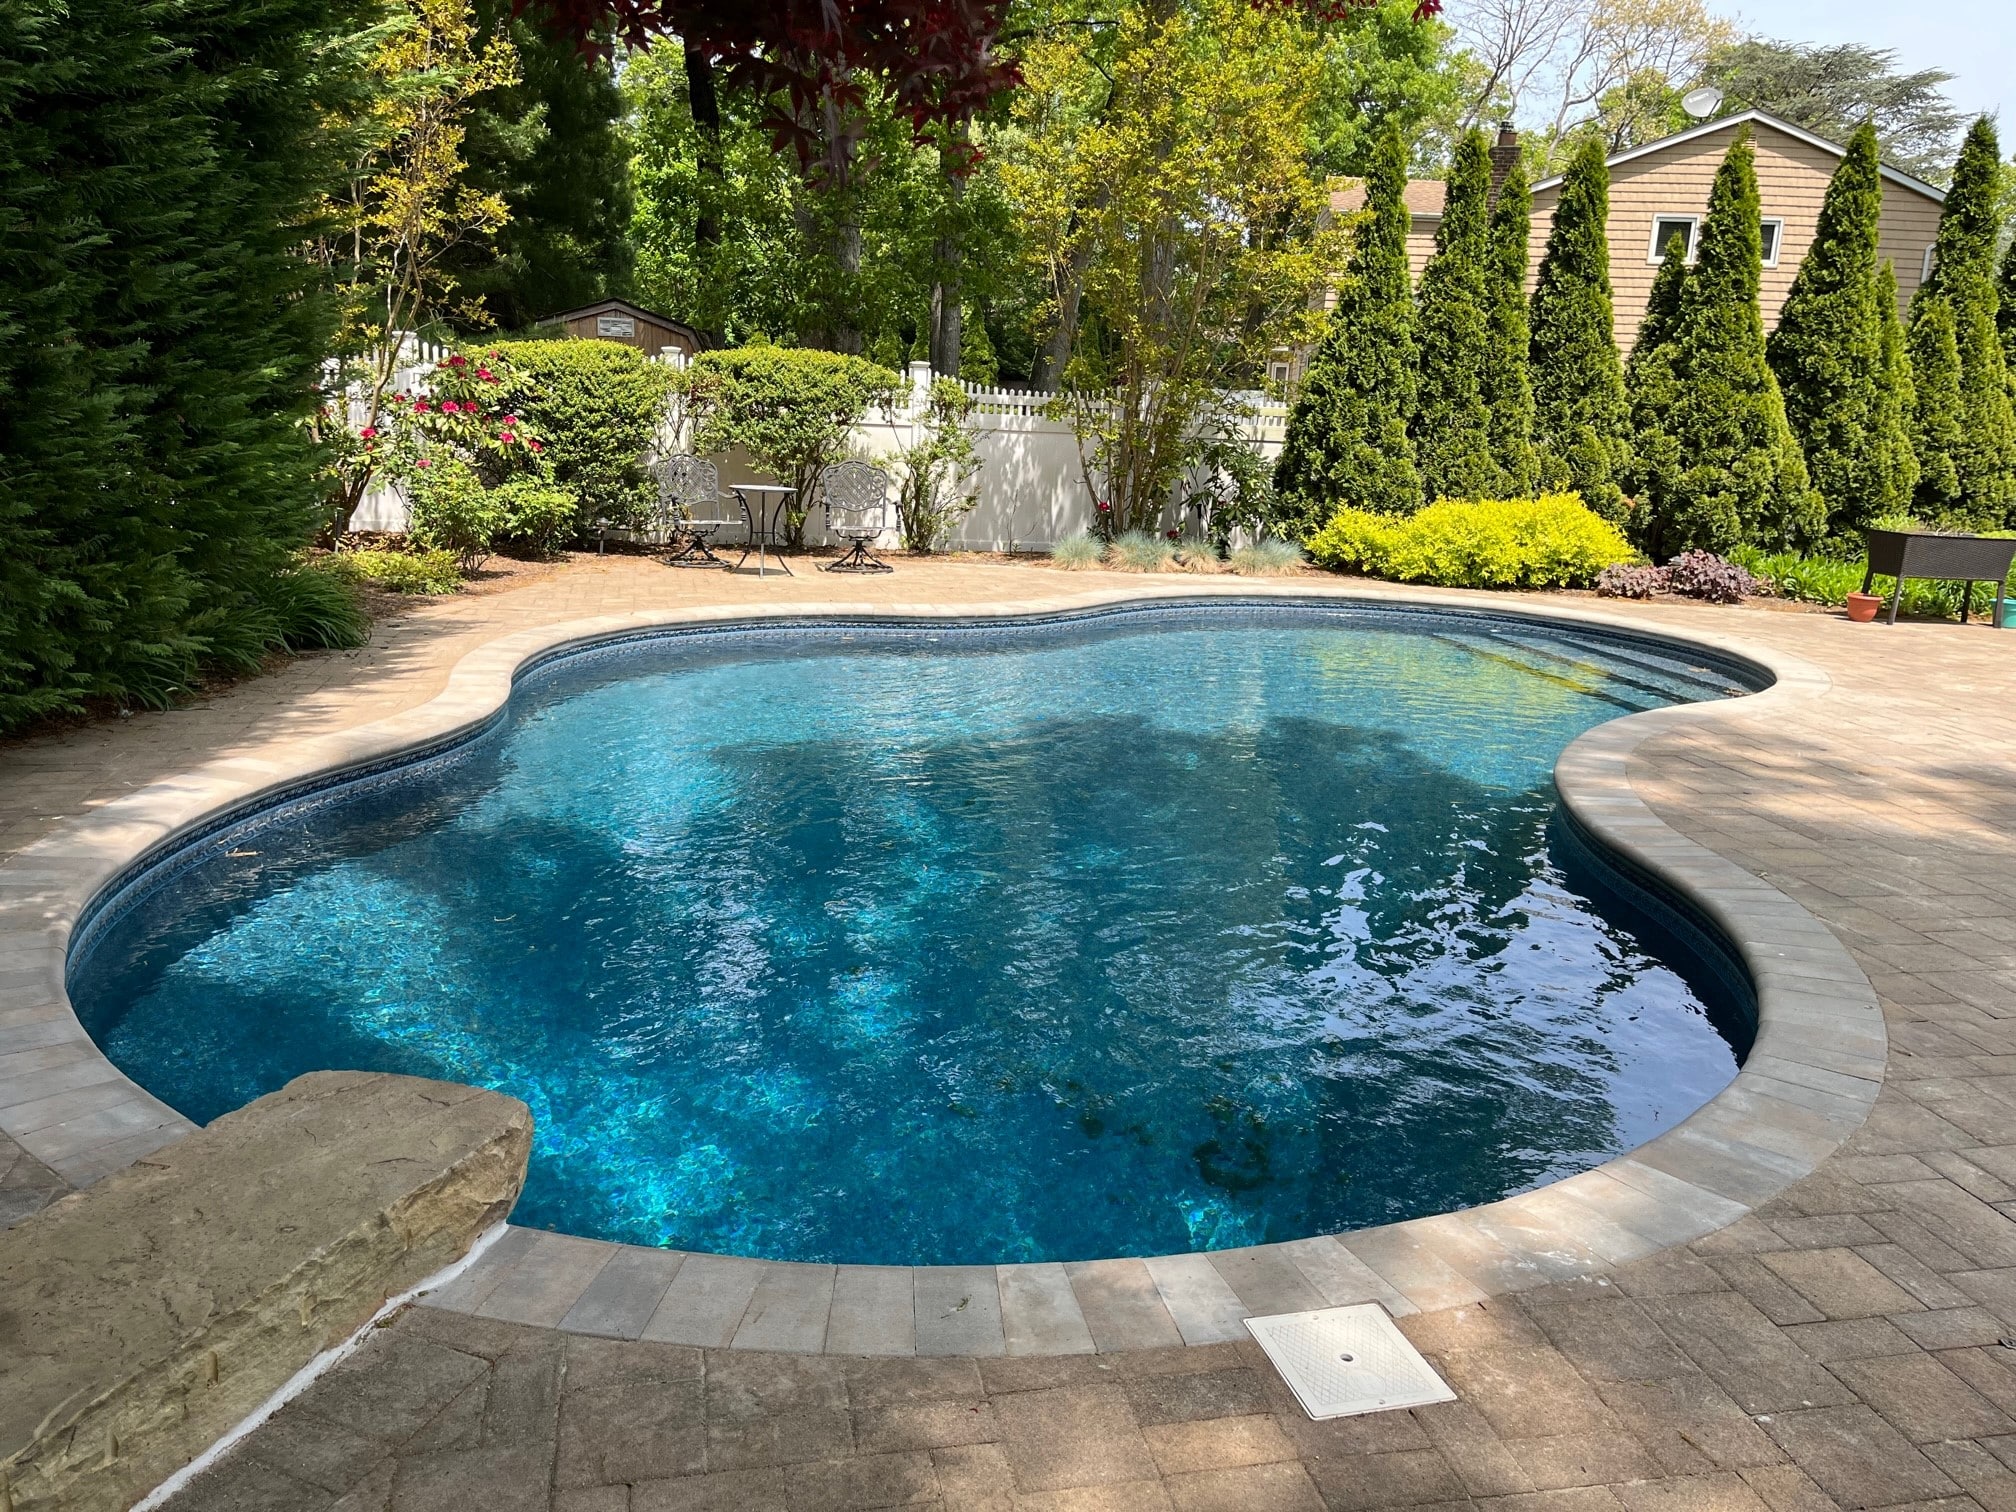 Pools, Pets and Kids: Top 8 Safety Tips to Know